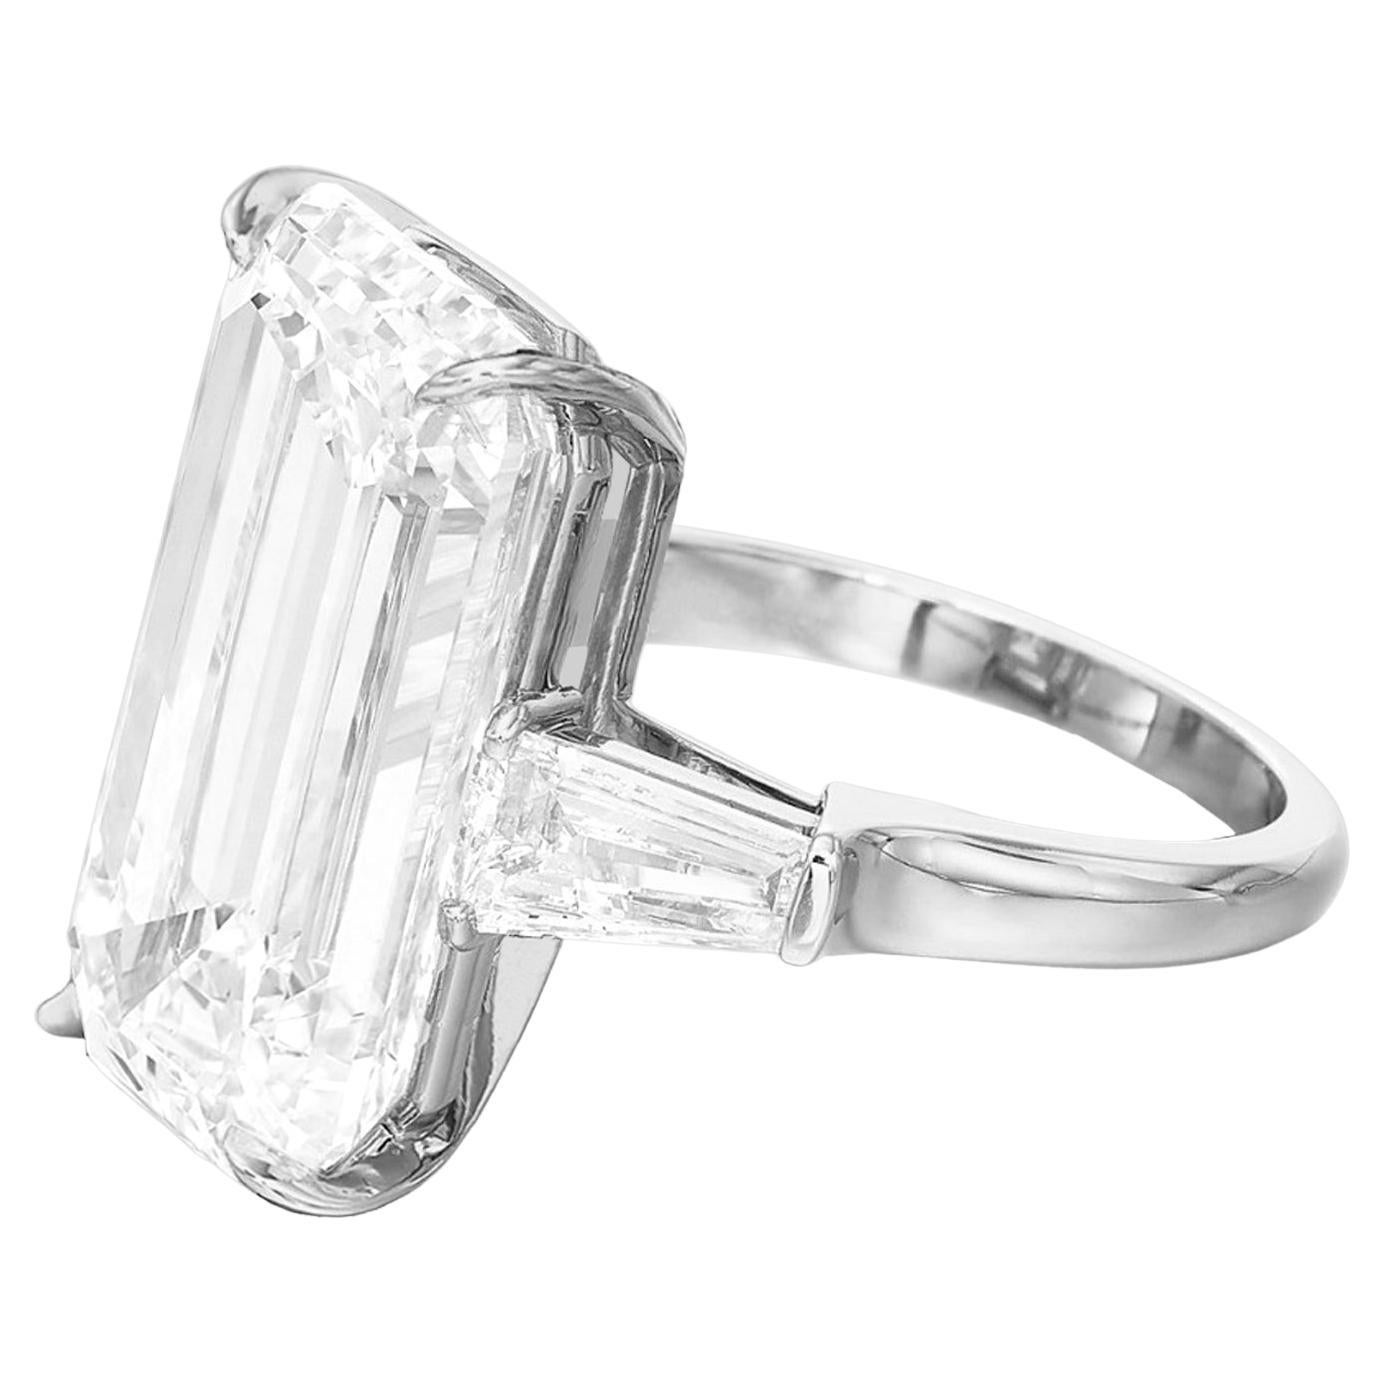 GIA Certified 10 Carat G Color Emerald Cut Diamond Engagement Platinum Ring For Sale